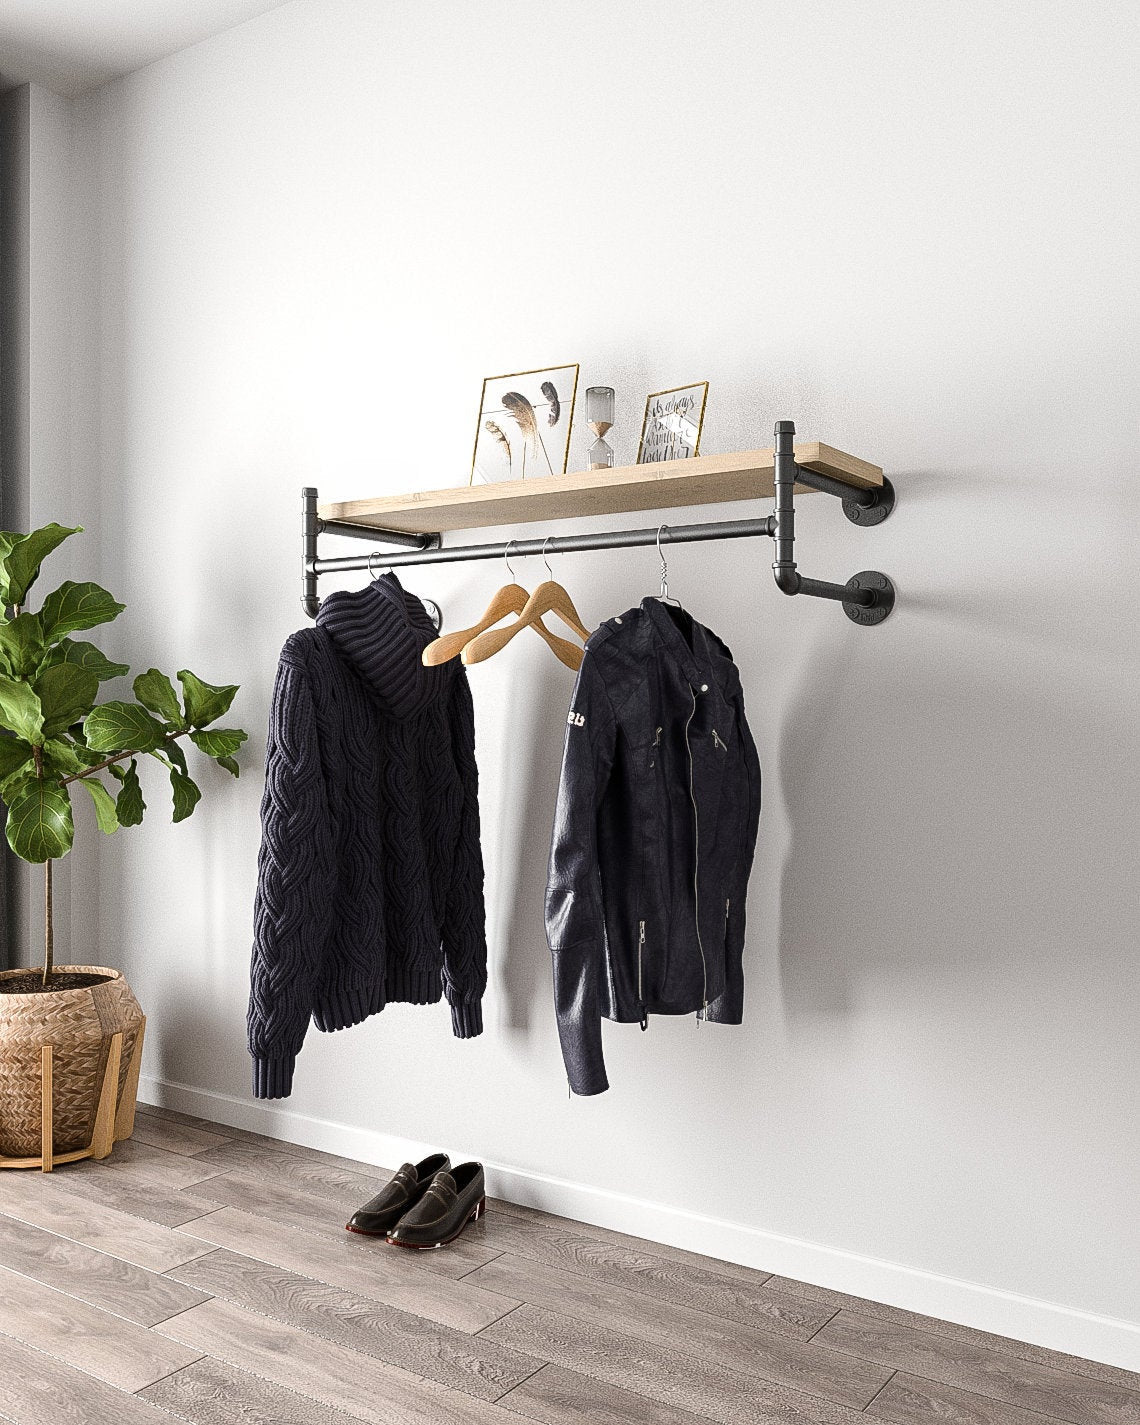 Leor Industrial Pipe Wall Mounted Clothing Rack, showcasing its sturdy malleable iron construction and vintage style